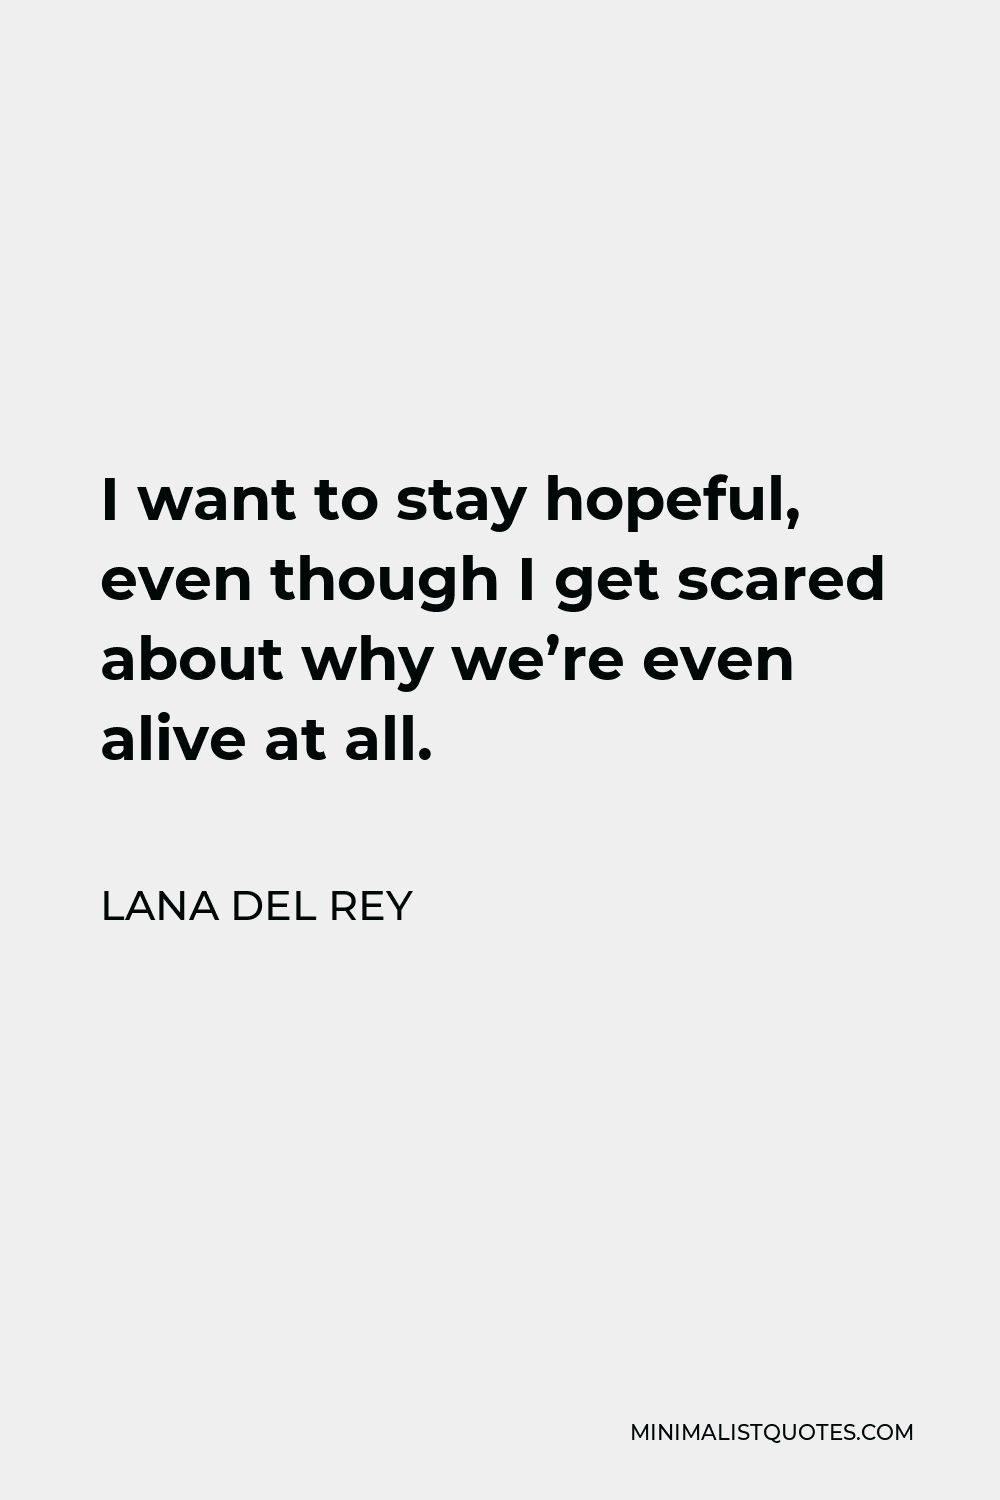 Lana Del Rey Quote - I want to stay hopeful, even though I get scared about why we’re even alive at all.